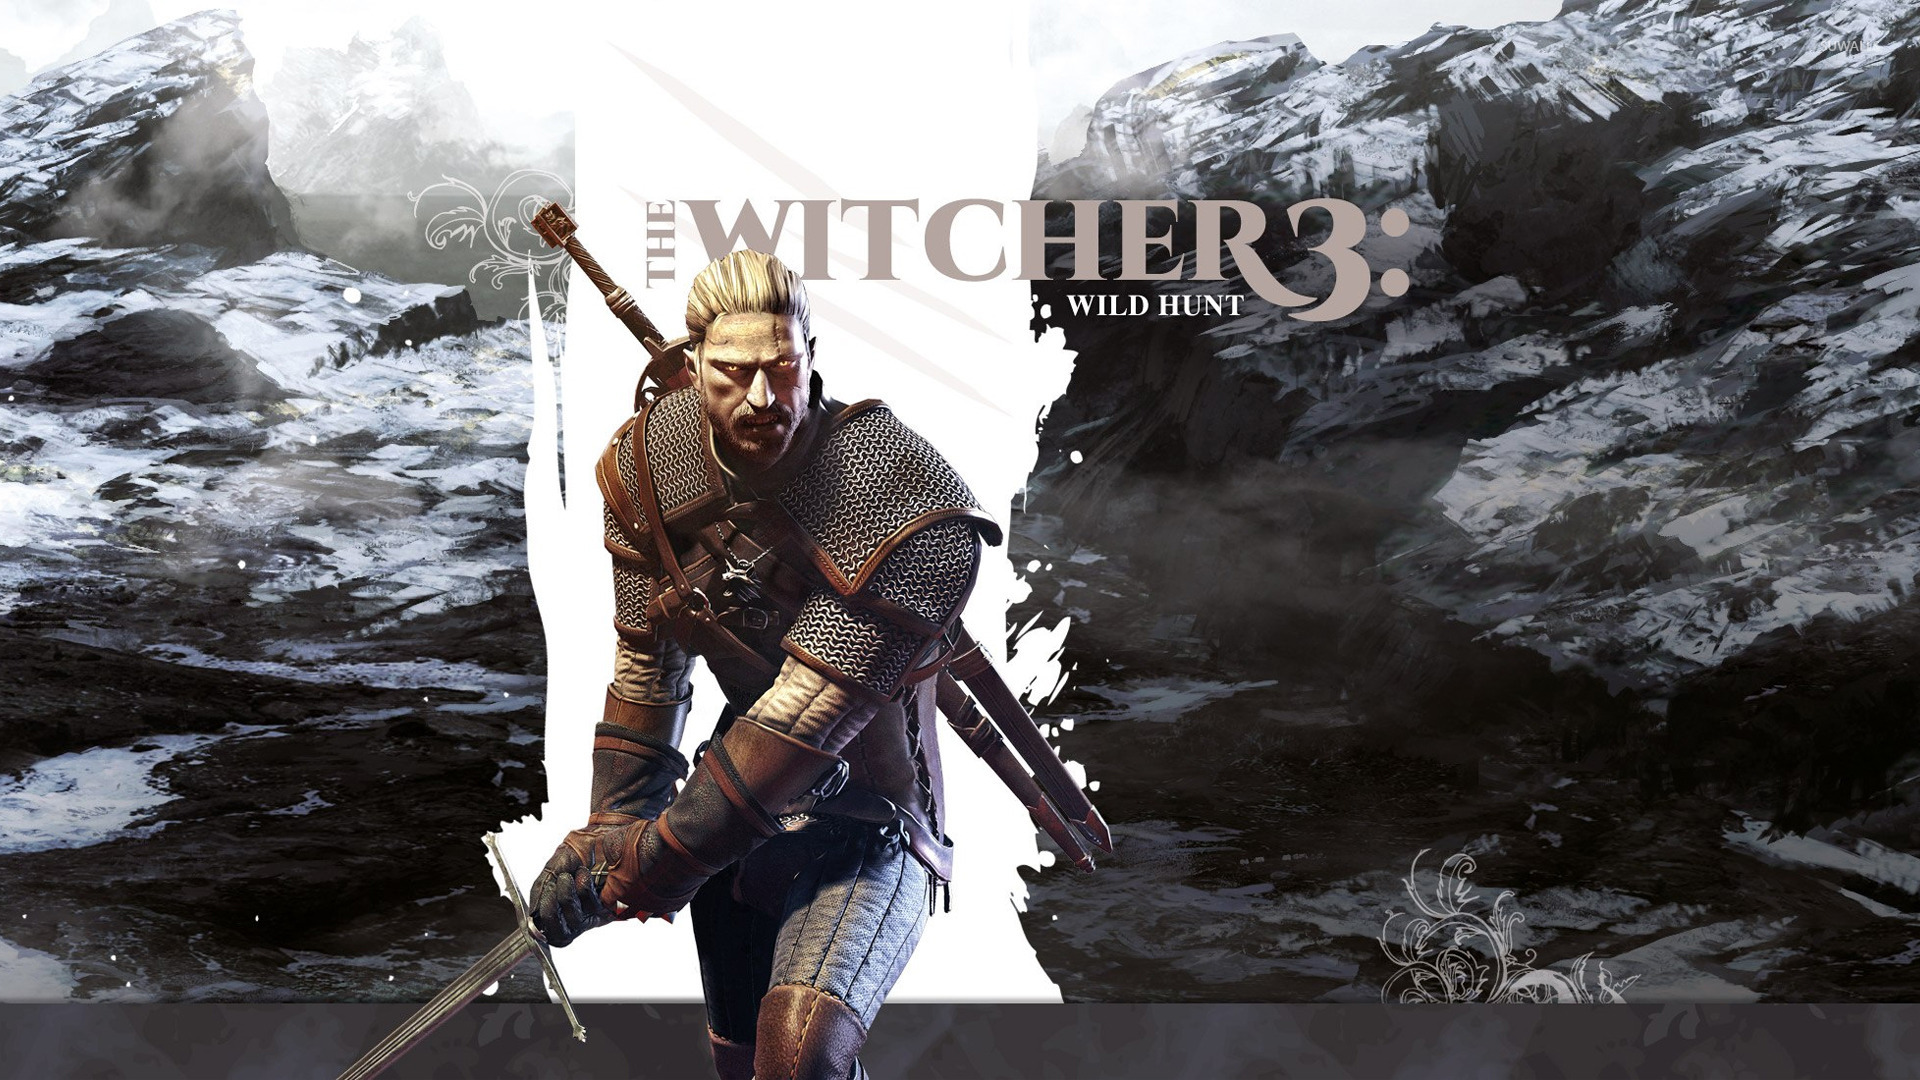 The Witcher 3 Wild Hunt wallpaper   Game wallpapers   21097 1280x800